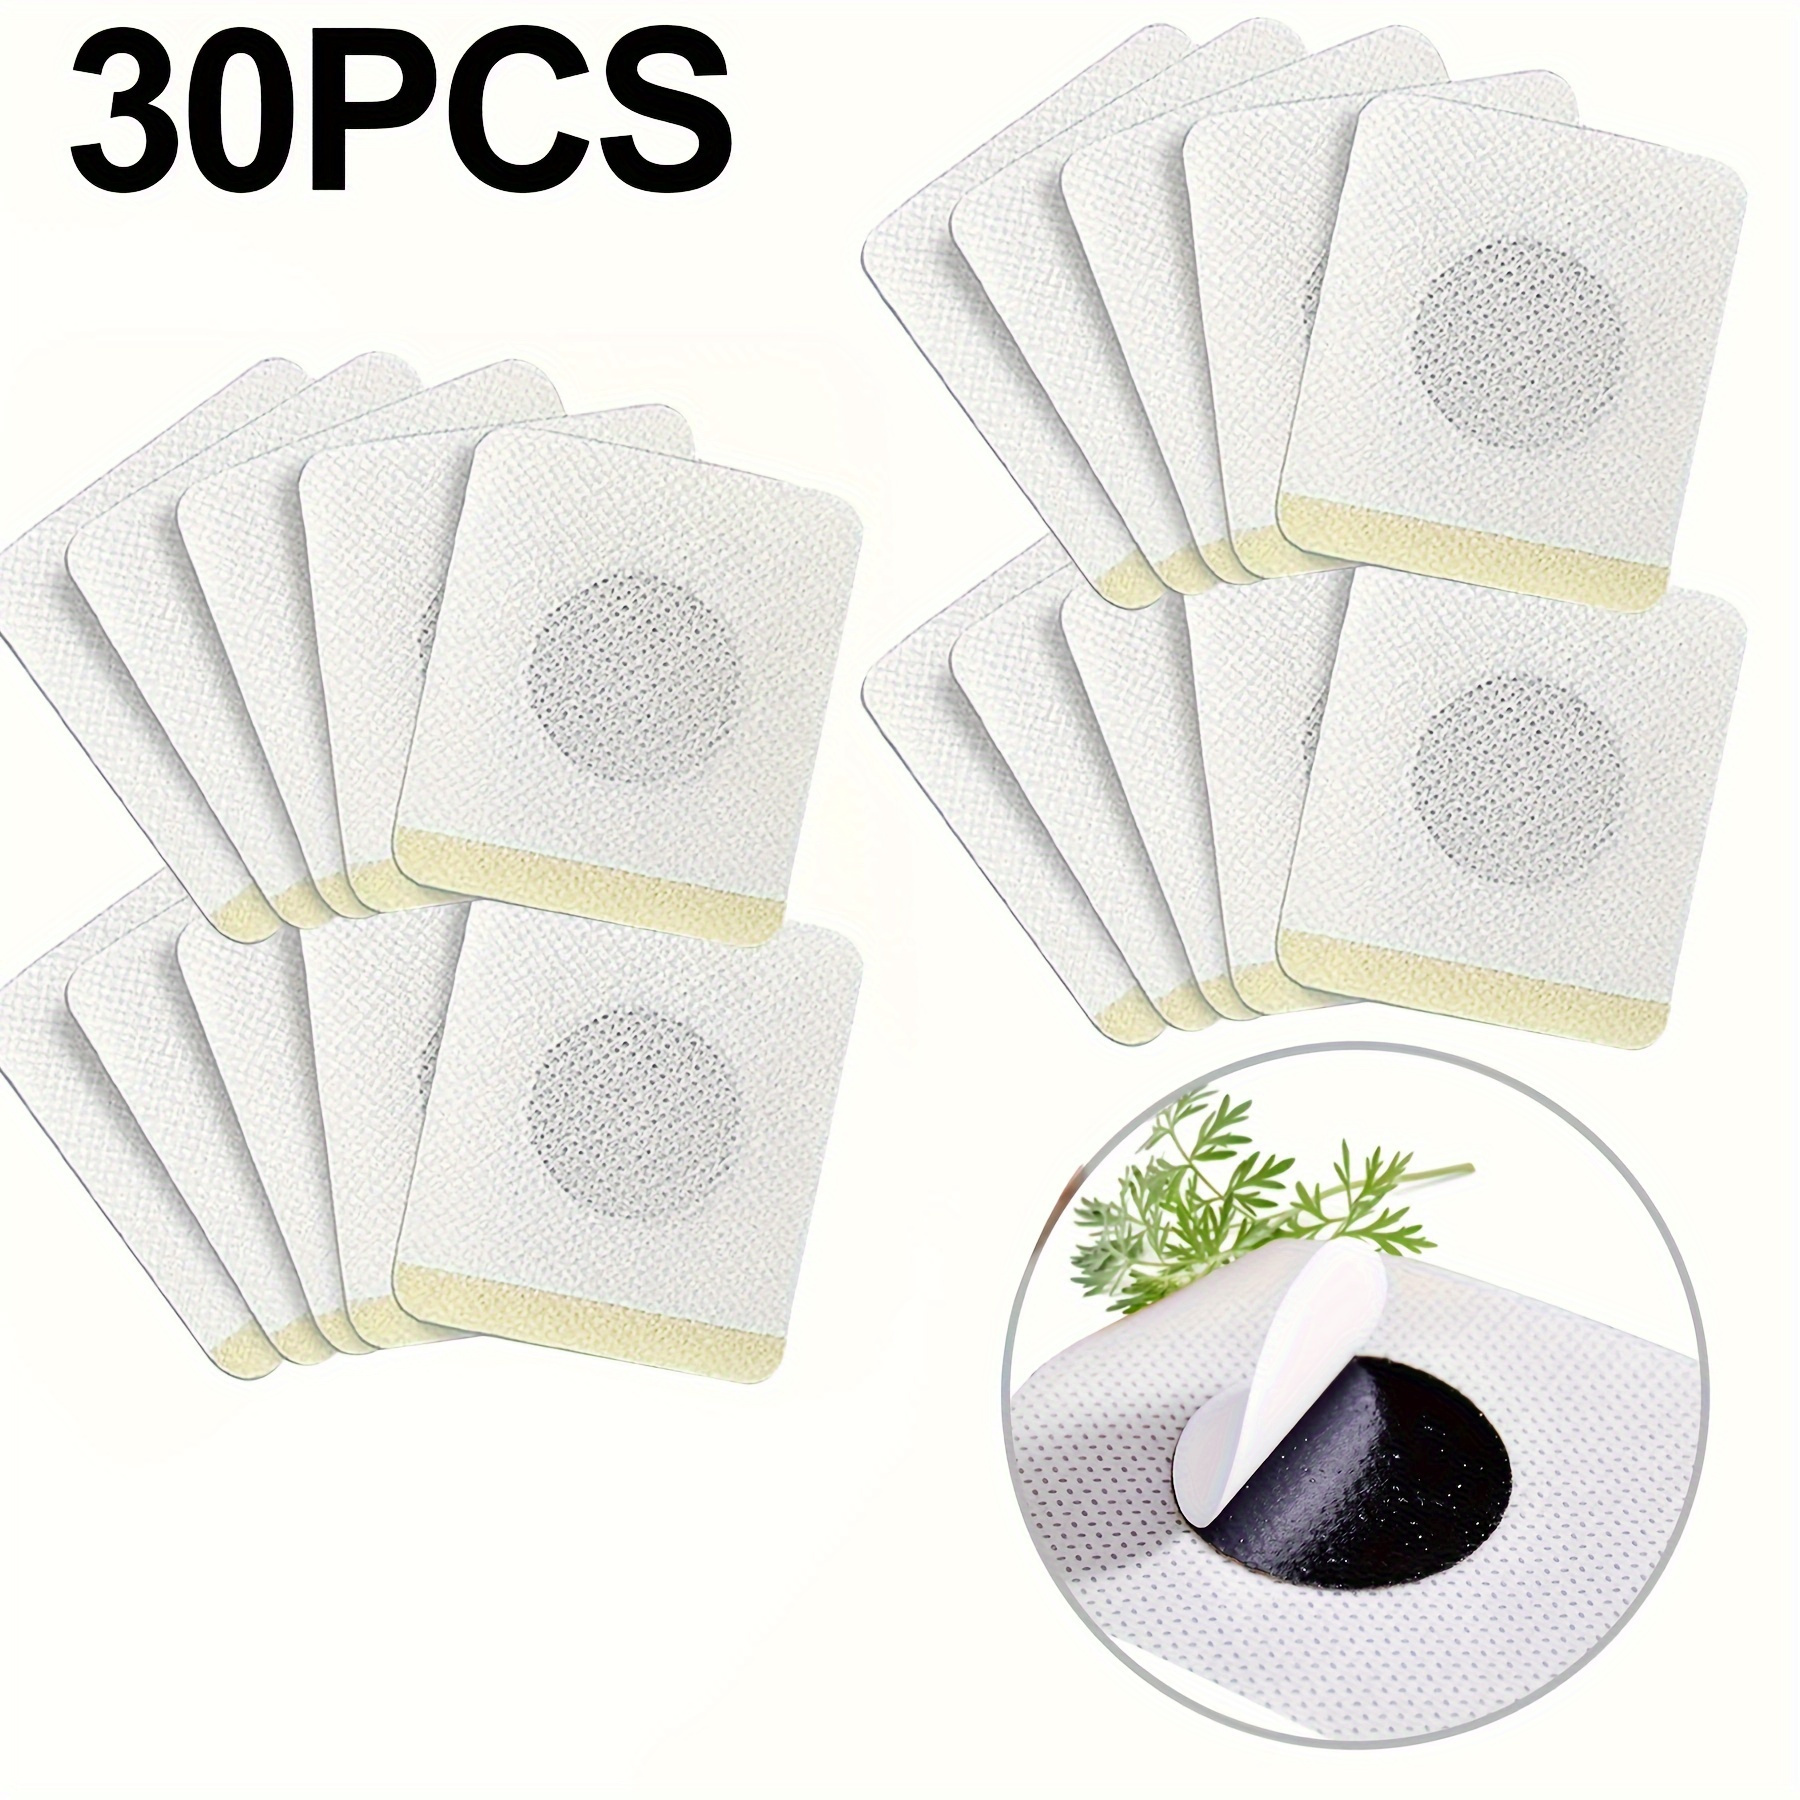 

30pcs Belly Patch With Natural Ingredients - Wormwood, Ginger, Honey, Longan, Sichuan Peppercorns - Polyester & Polycotton, Featherless, No Electricity Needed - Herbal Pills Detox Sticker For Women